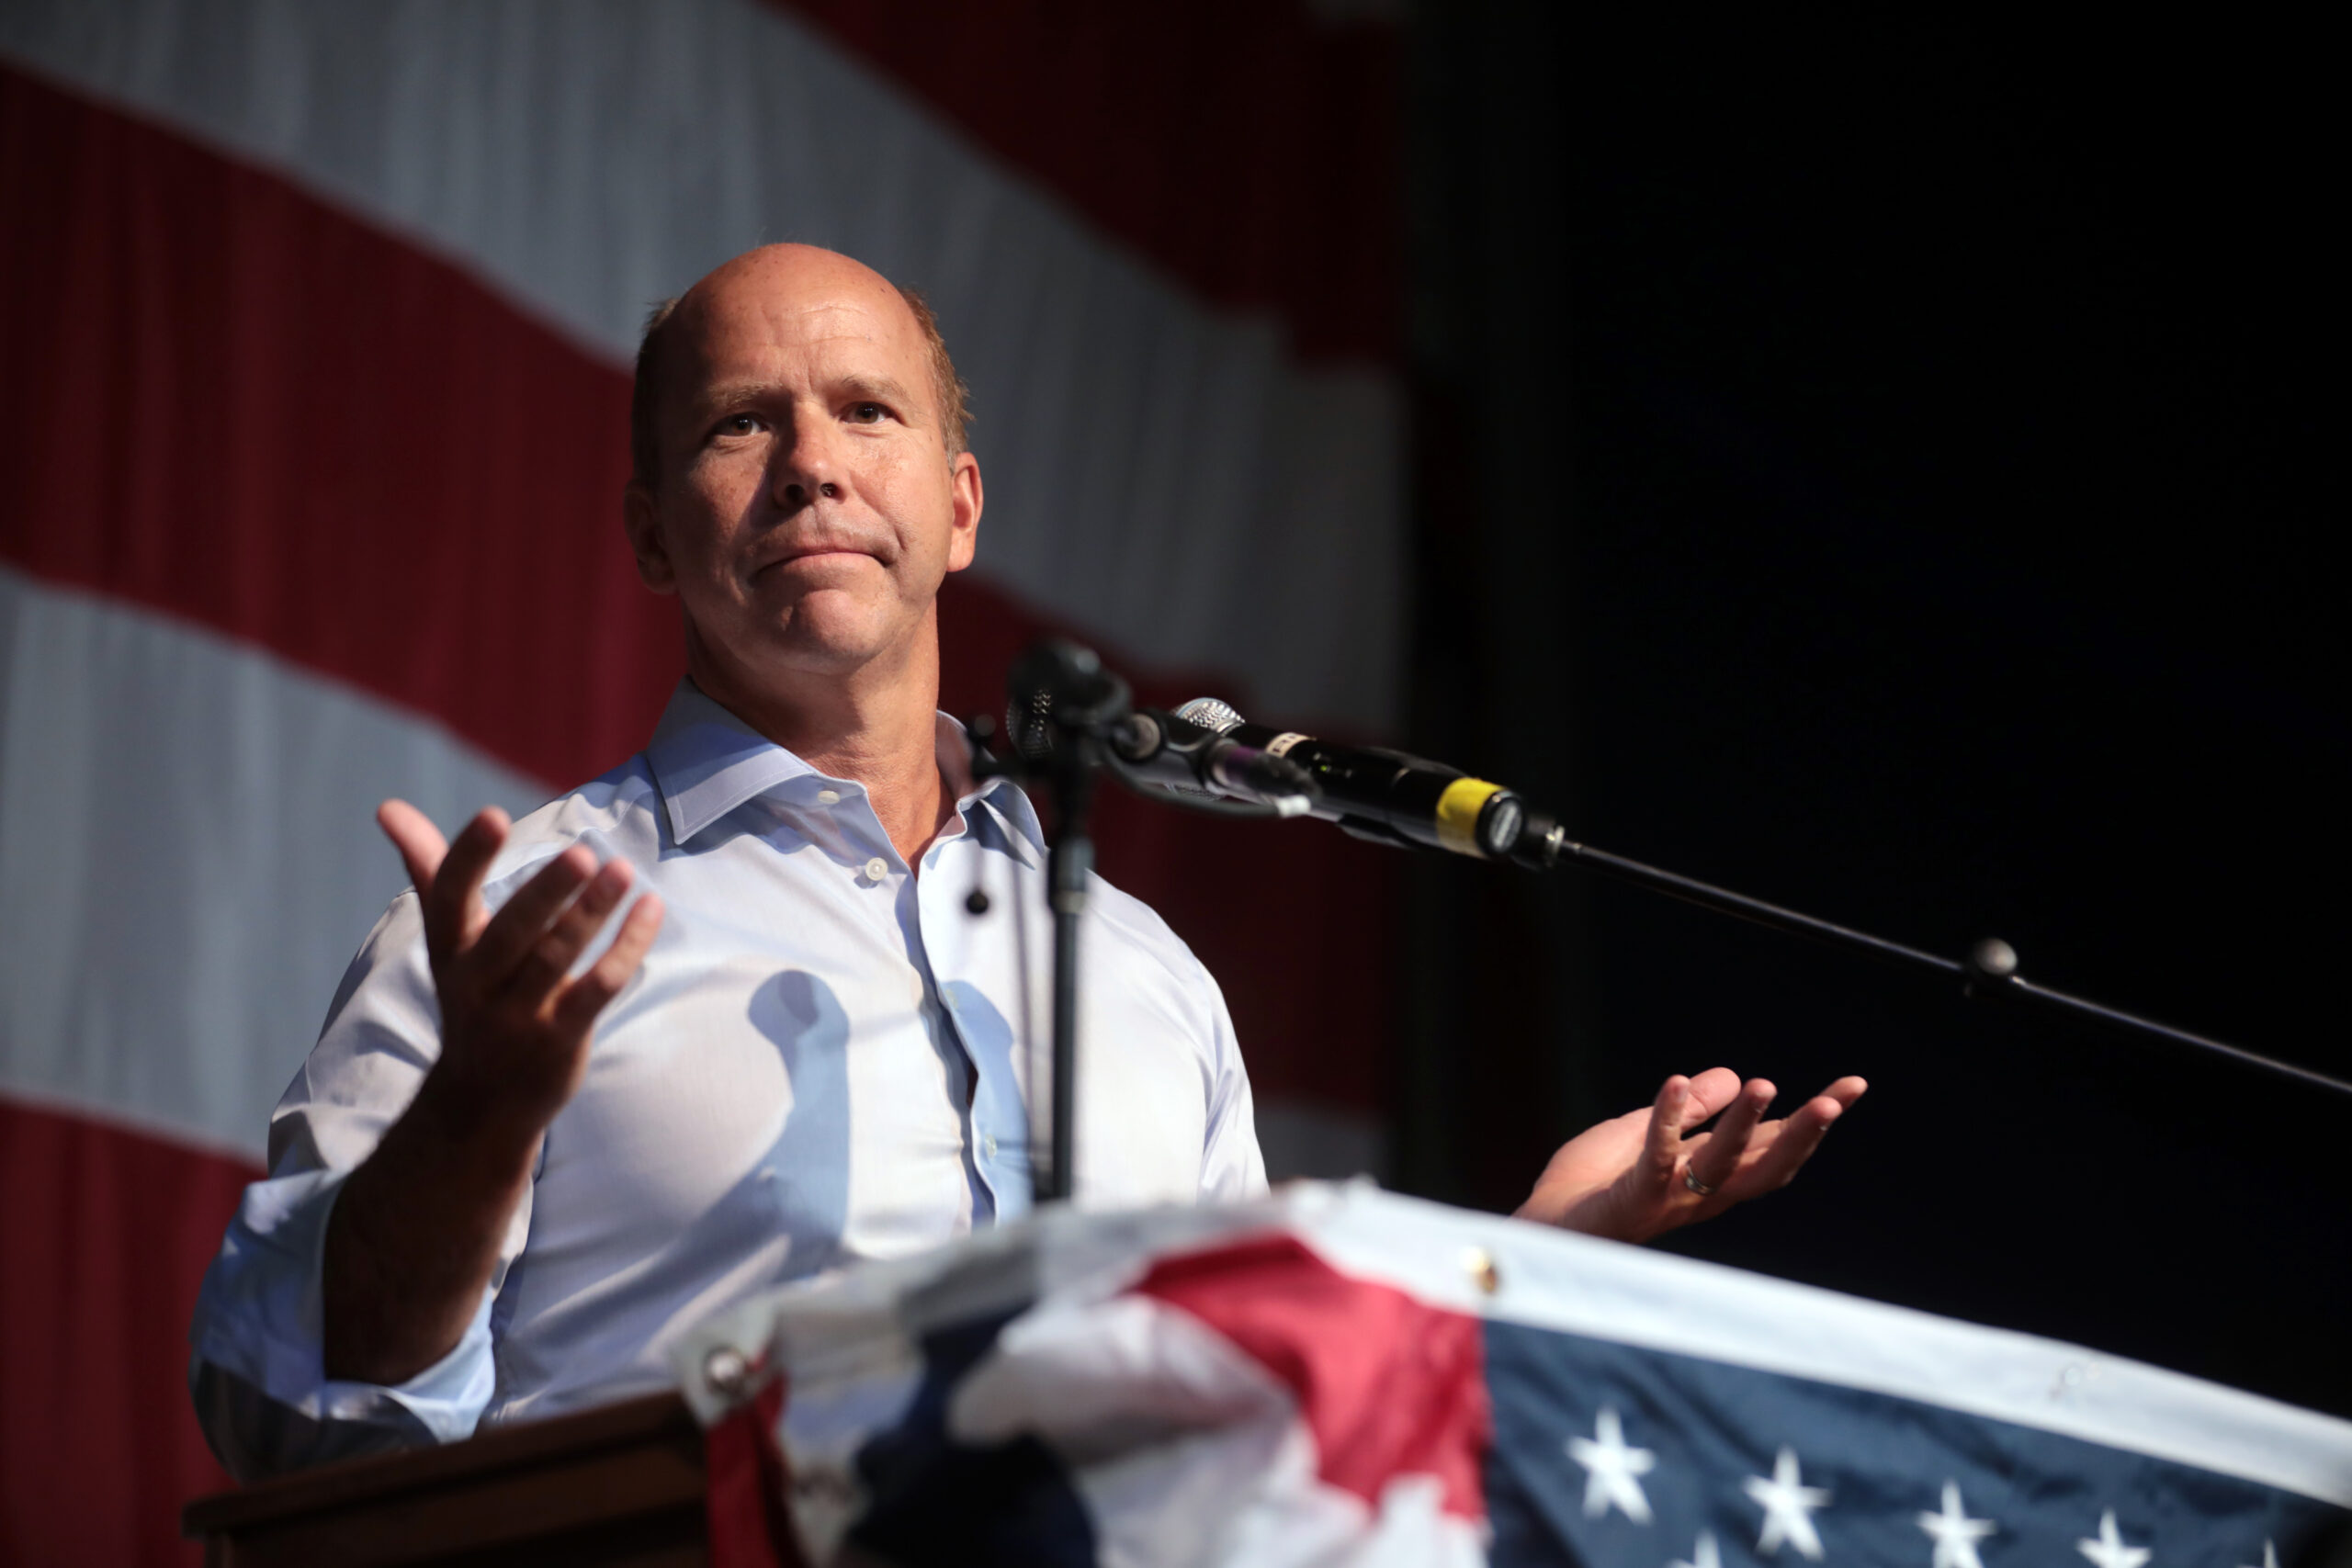 Delaney dropped out of the nomination process on Friday